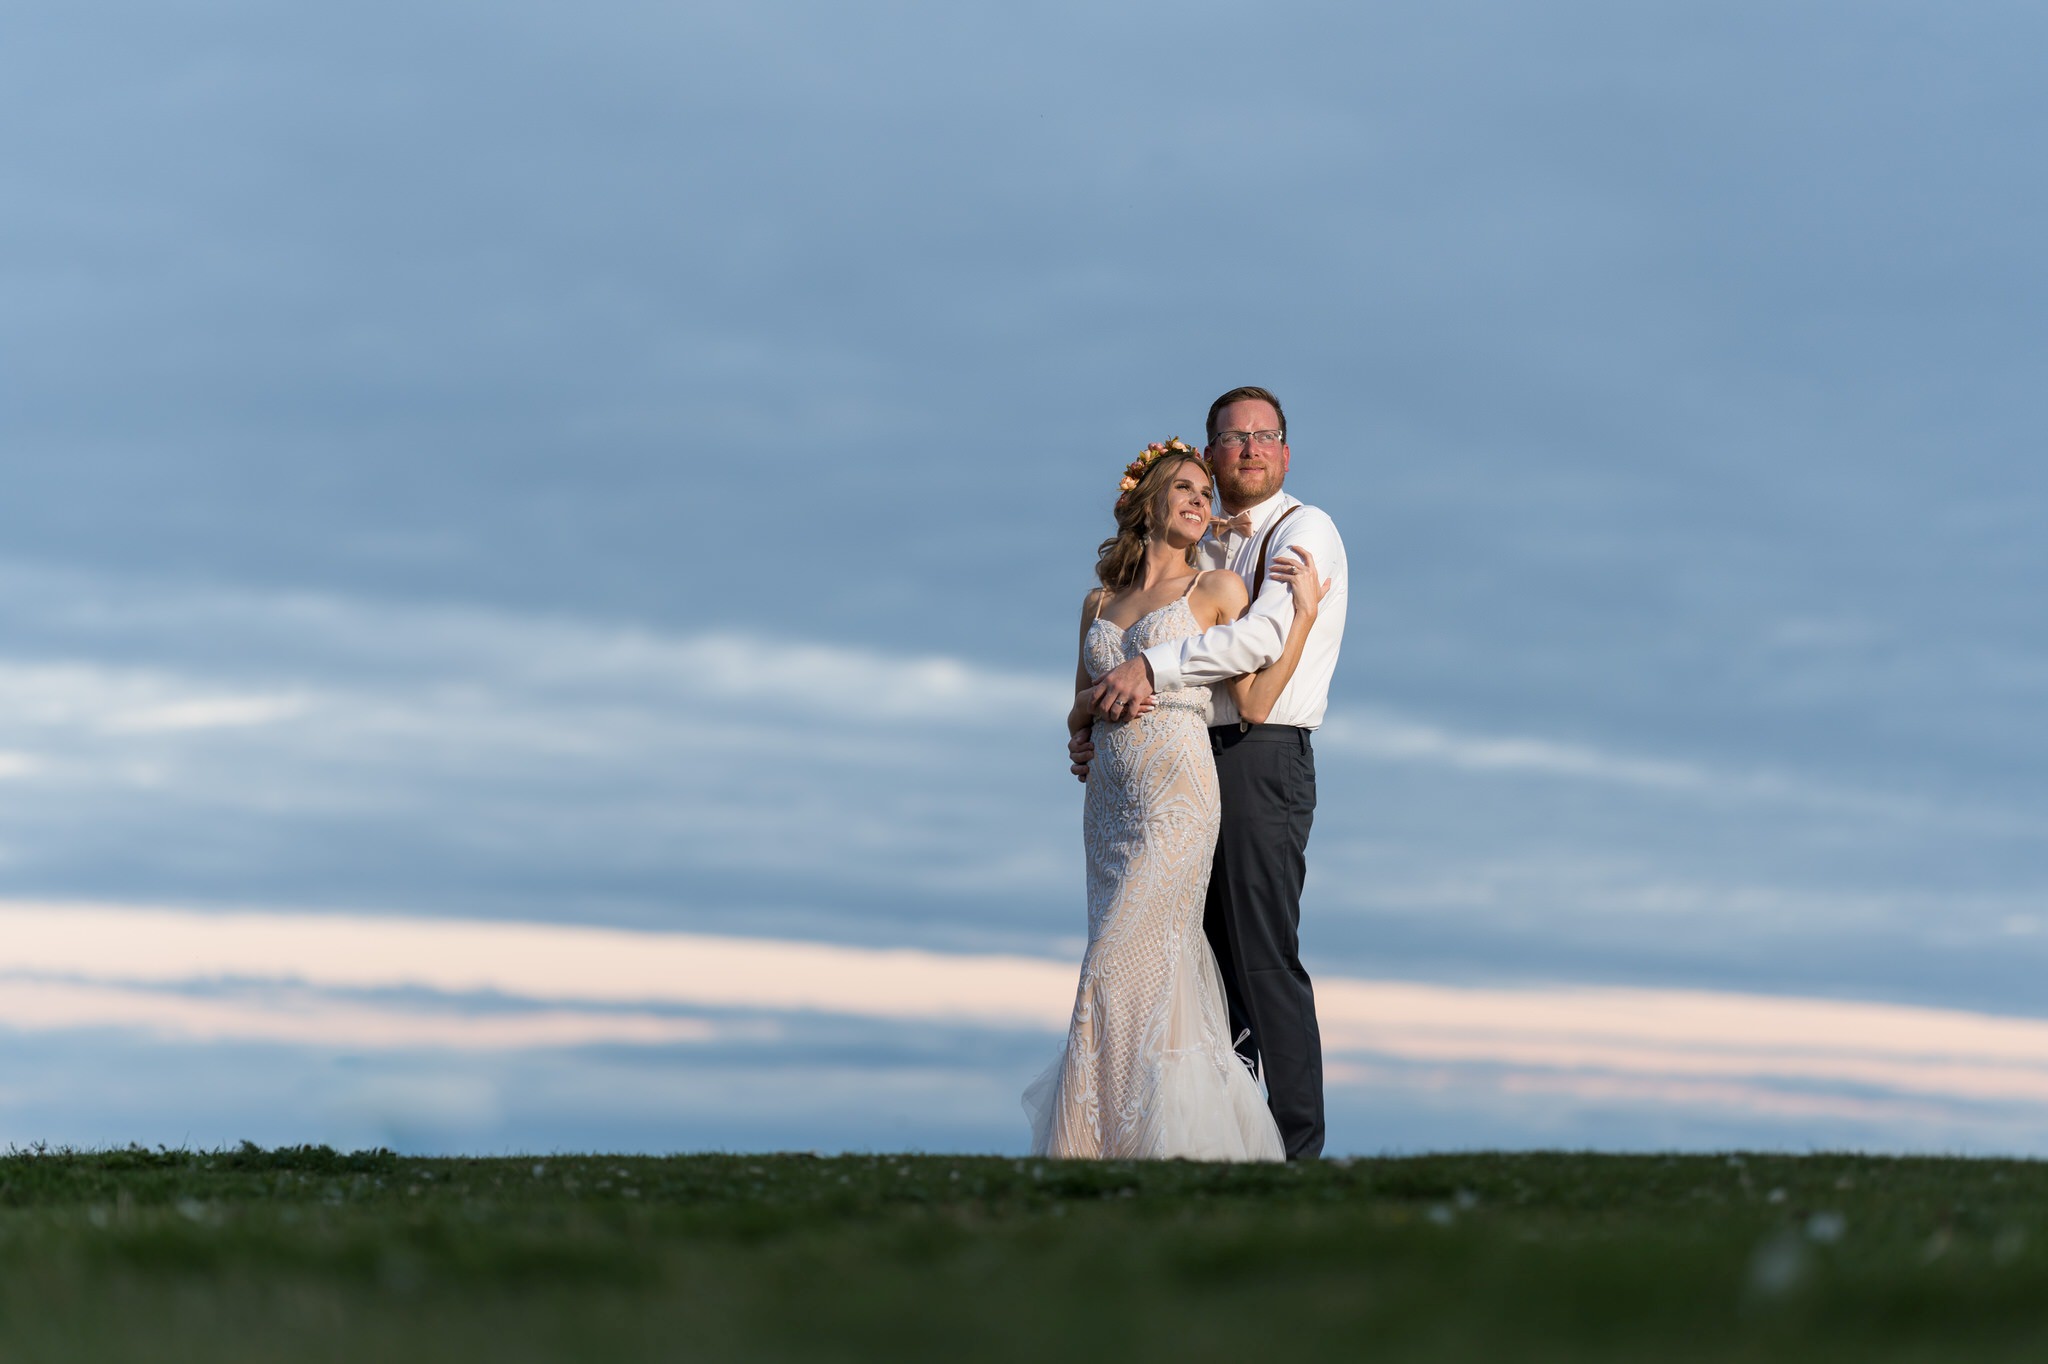 The groom hugs the bride from behind at sunset at their Mission Pointe Resort wedding.